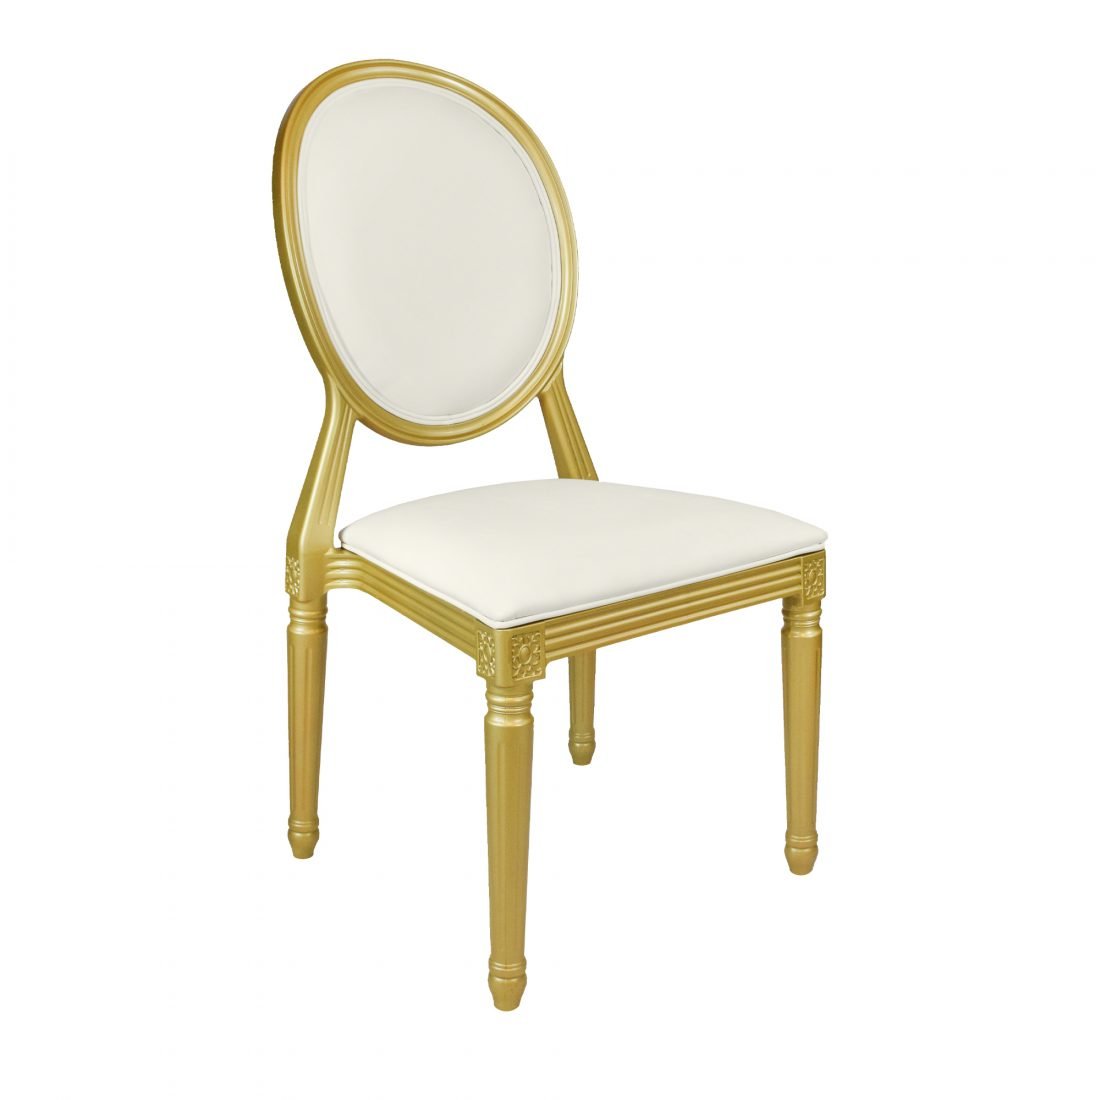 Gold Resin Louis Pop Chair with White Back Rest